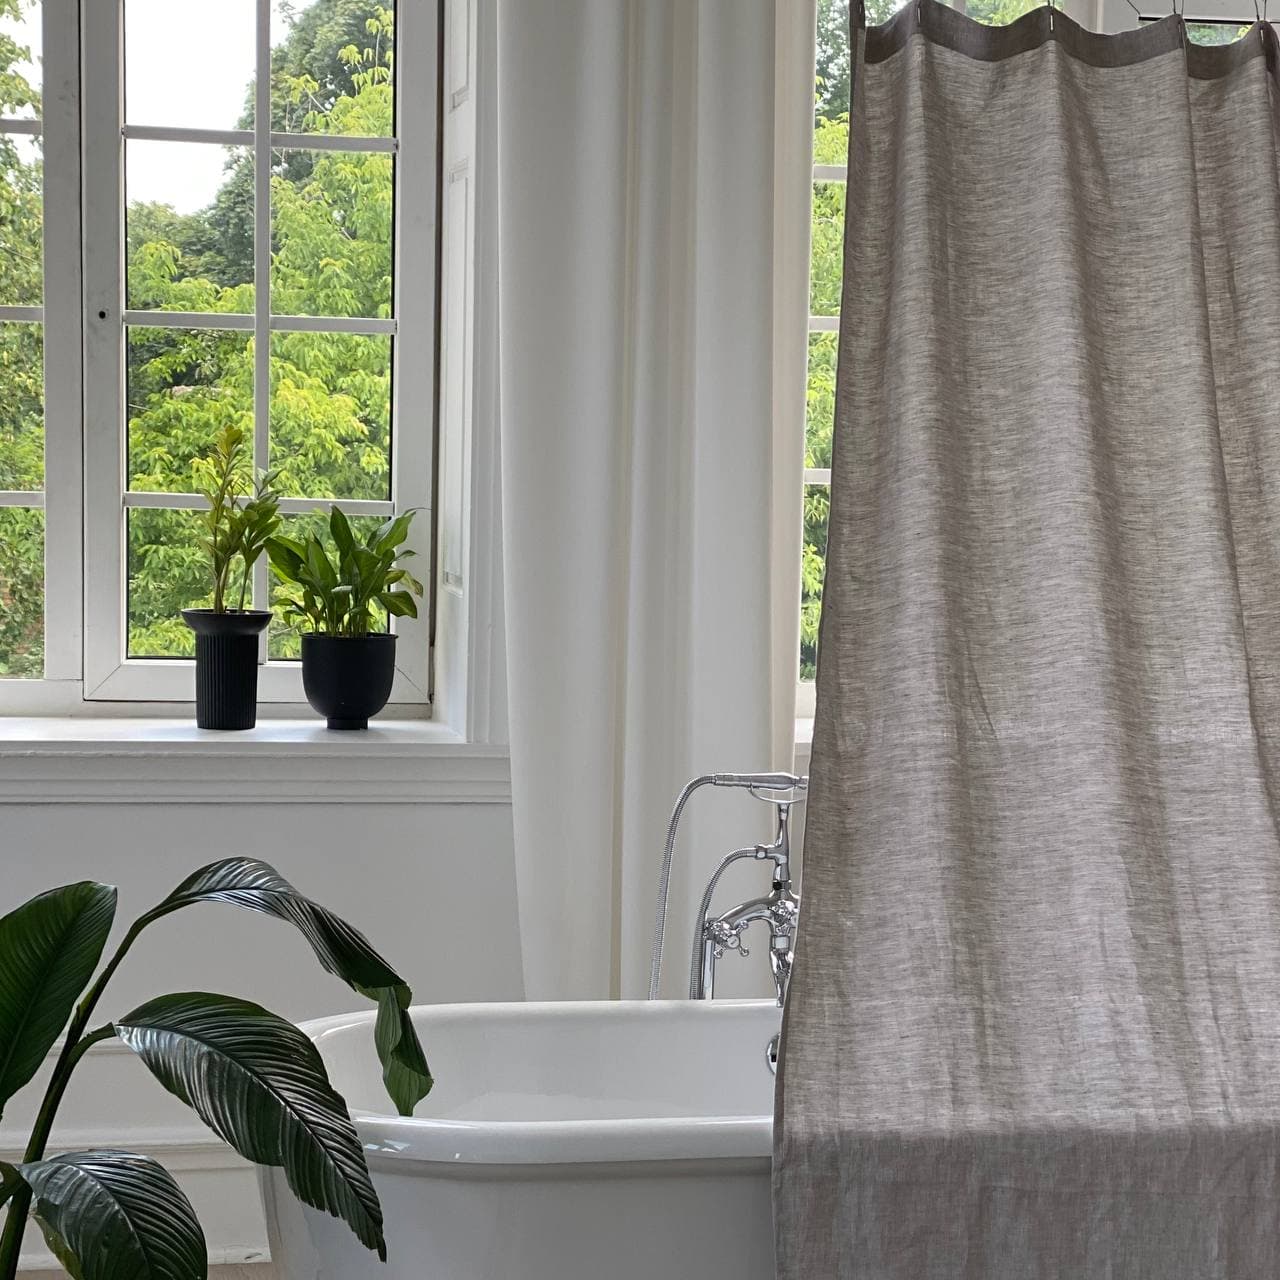 4 Crafty Ways to Use a Cotton Shower Curtain Outside the Bathroom